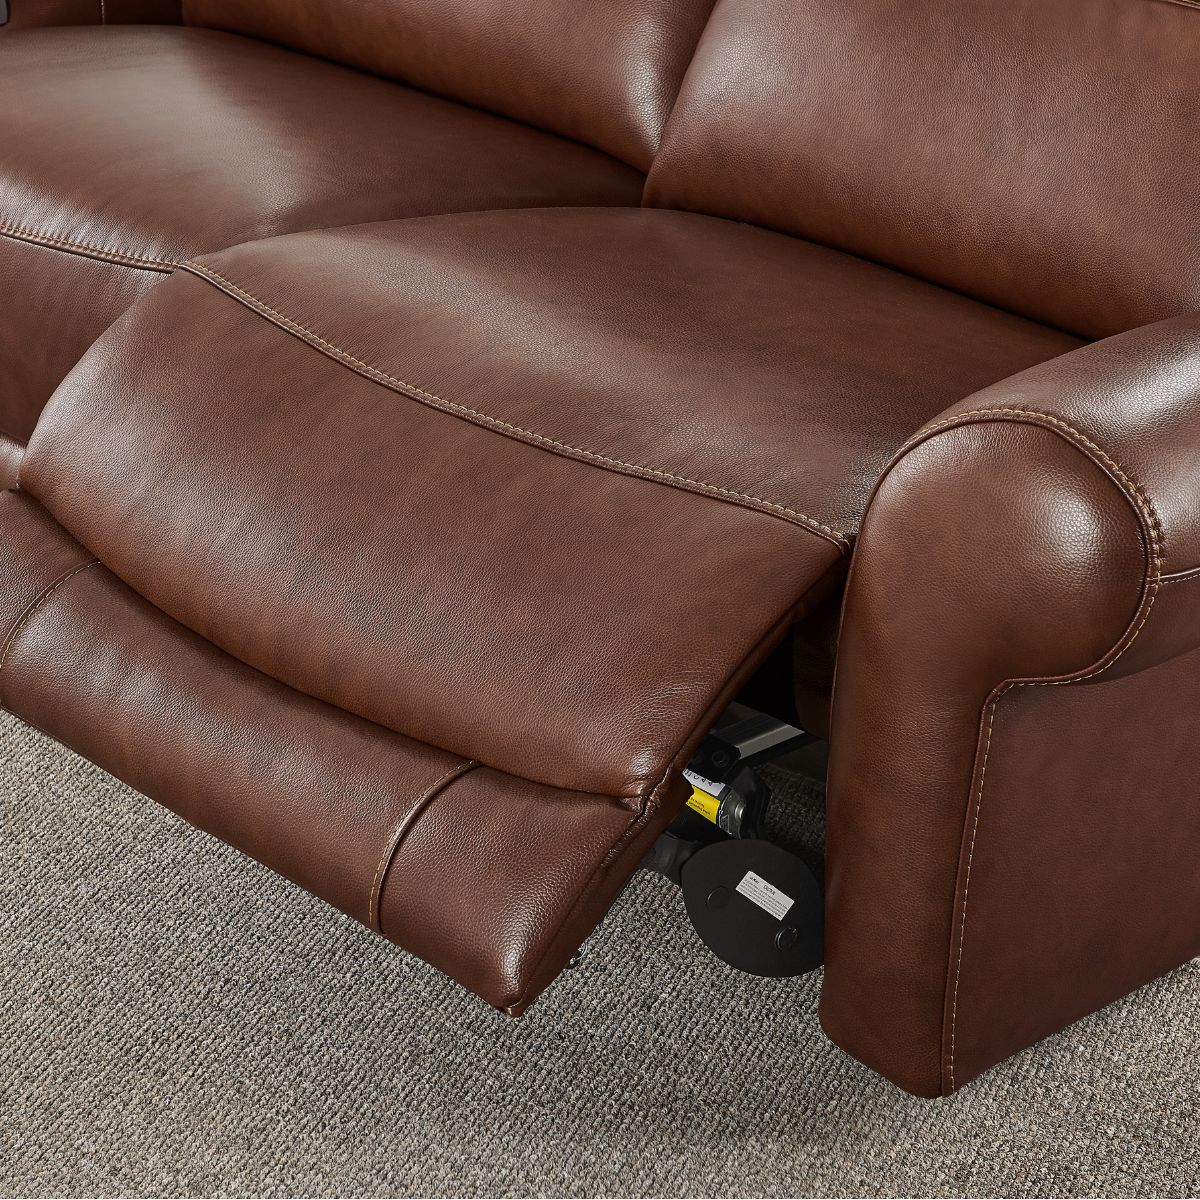 Lindfield Tan Leather 3 Seater Powered Recliner - 5